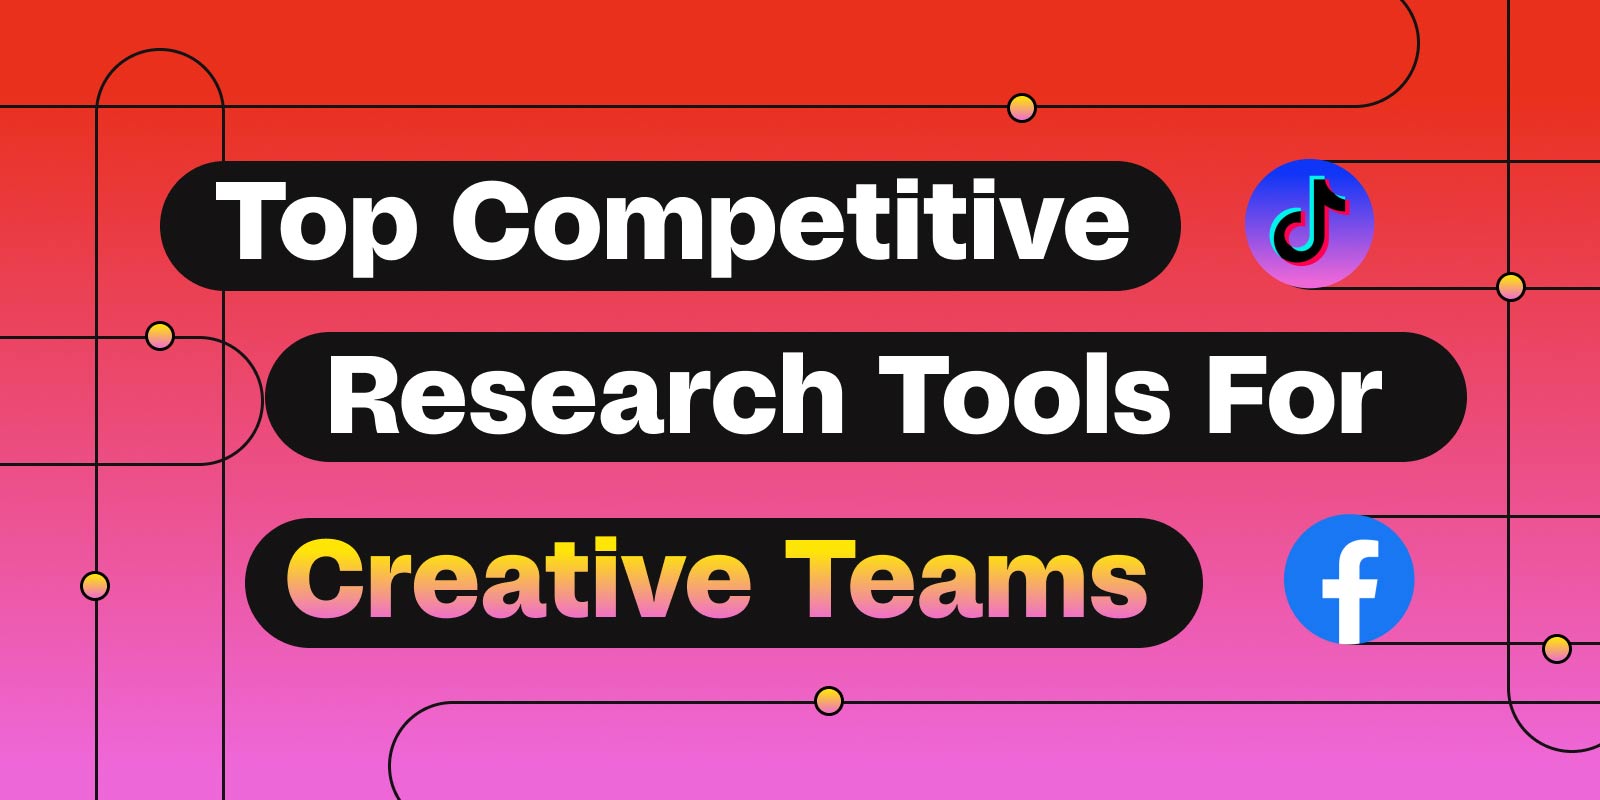 Top Competitive Research Tools for Creative Teams